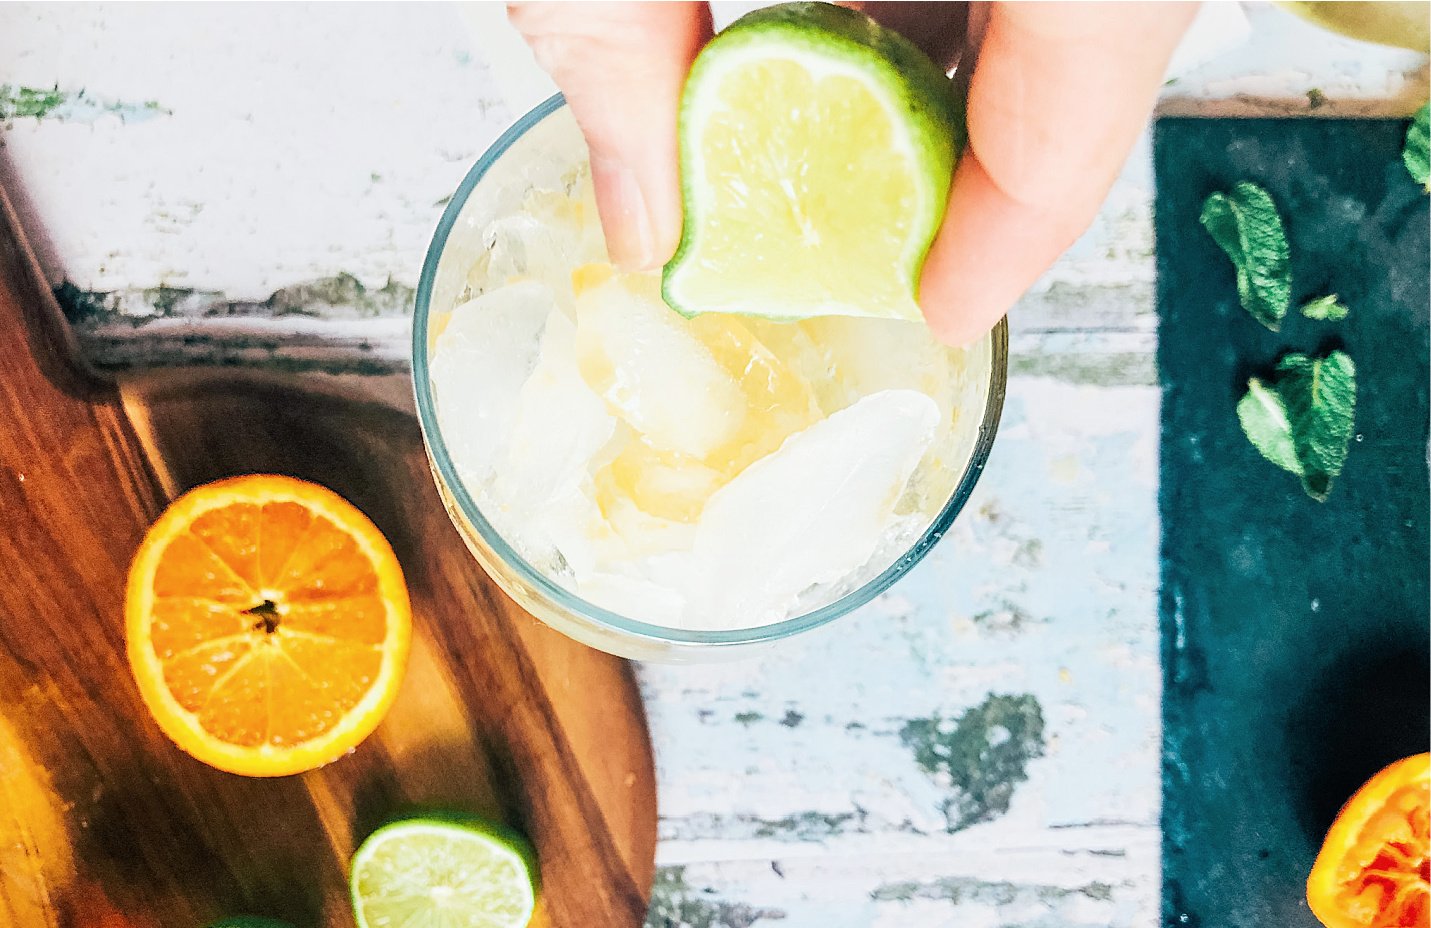 Add the orange, lime and ice to a glass